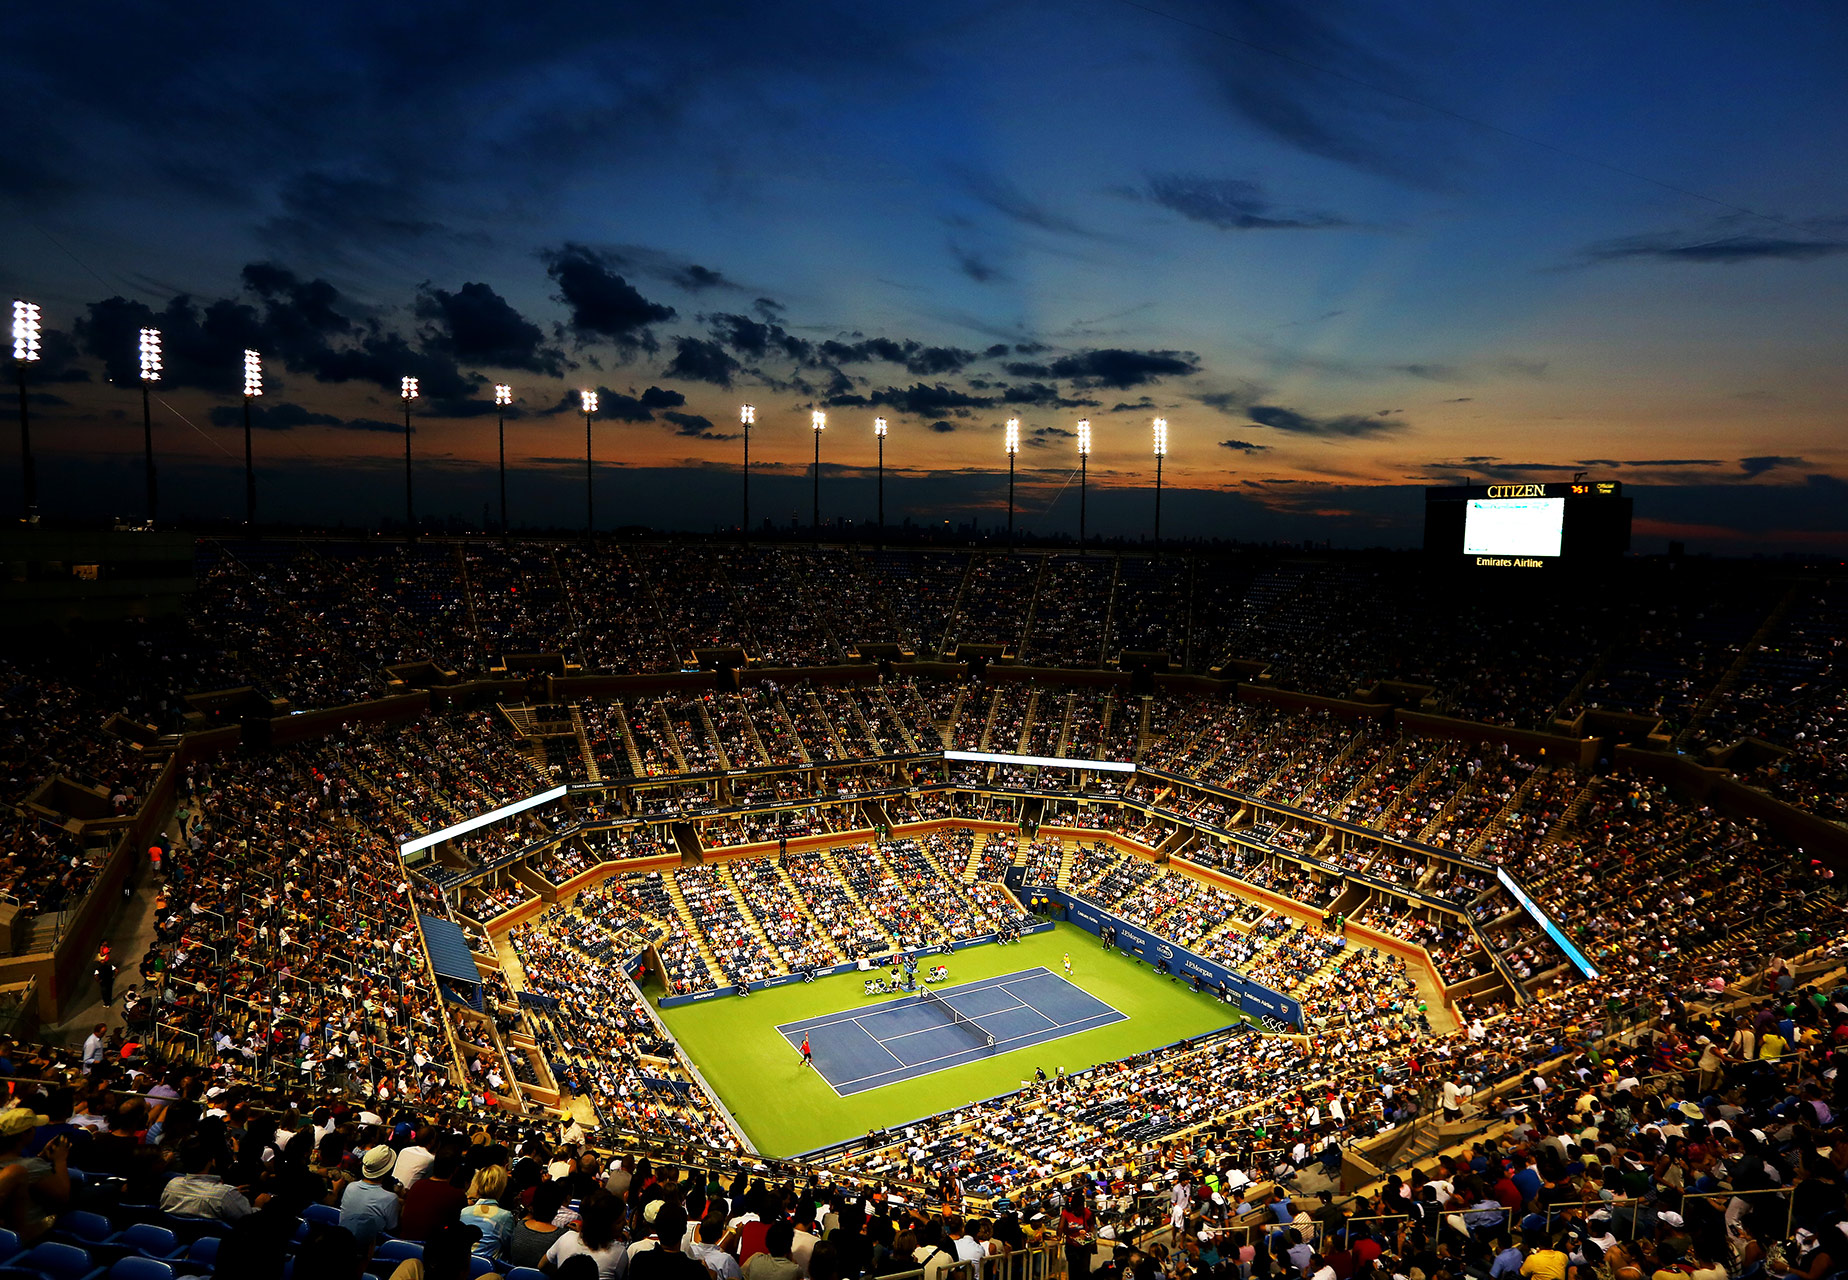 US Open-US Open Tennis Championship: Session 17 - Men's/Women's Quarterfinals tickets price and order